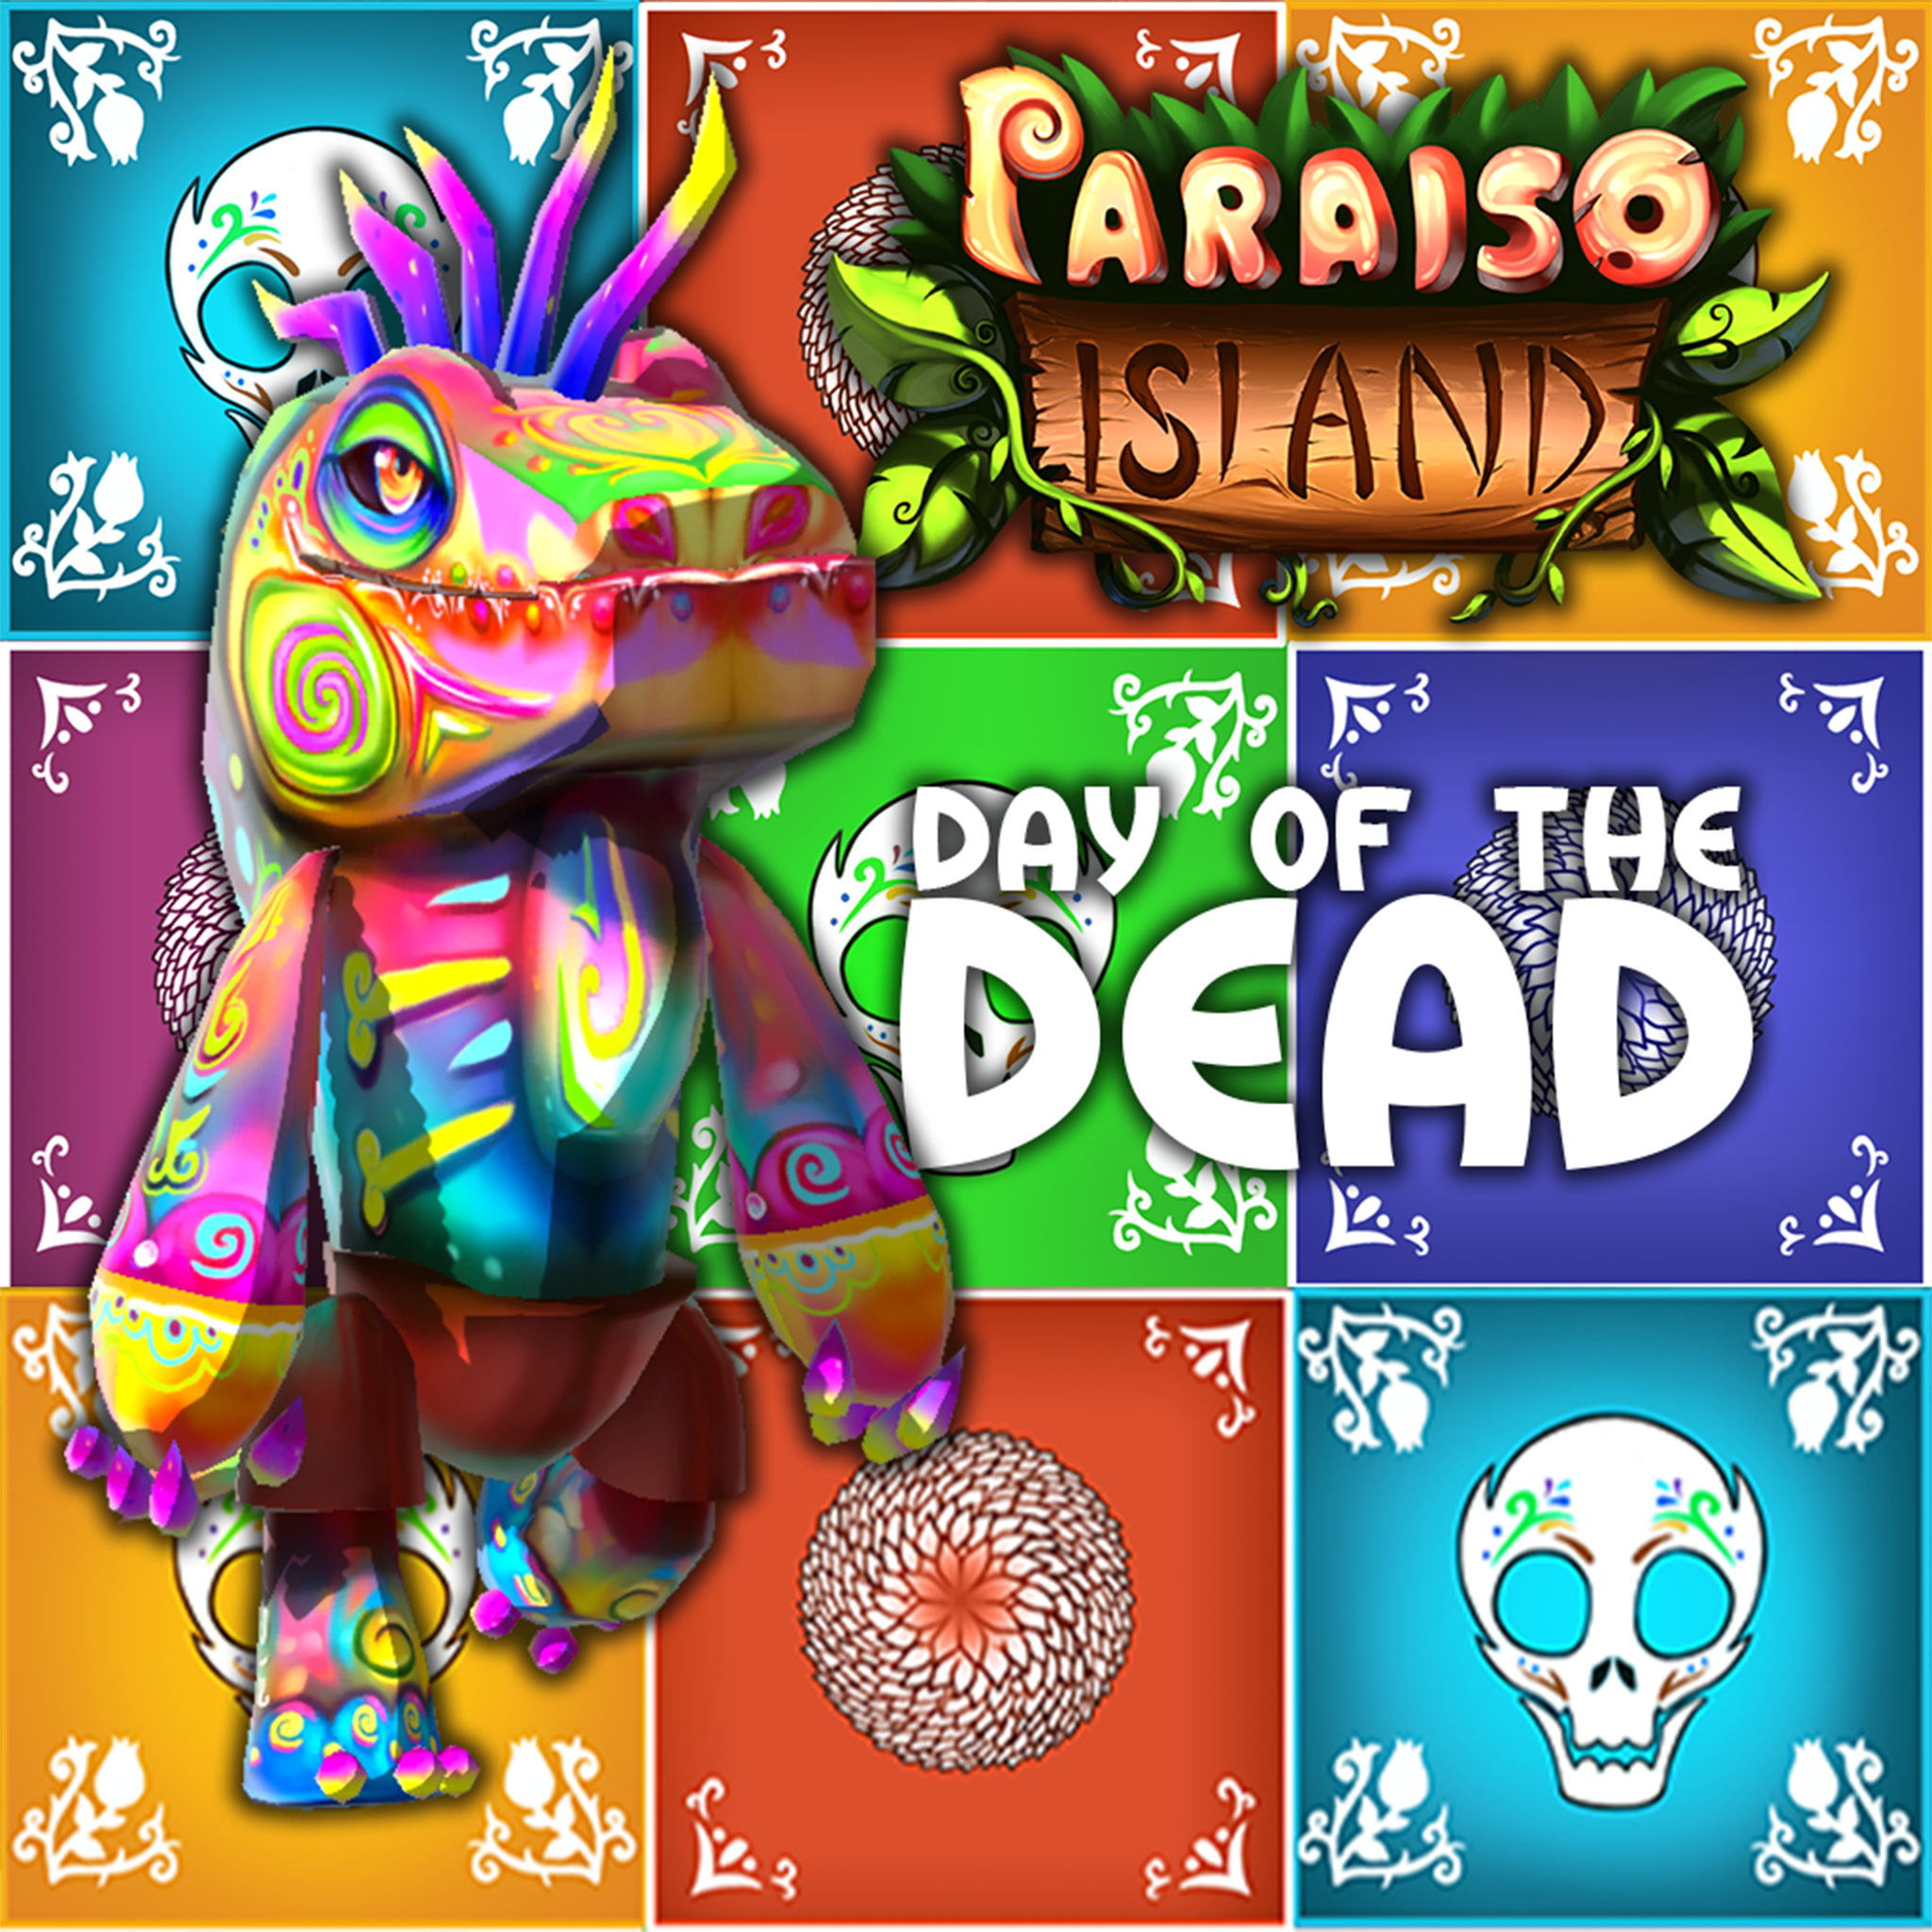 Paraiso Island 'Day of the Dead' DLC Pack